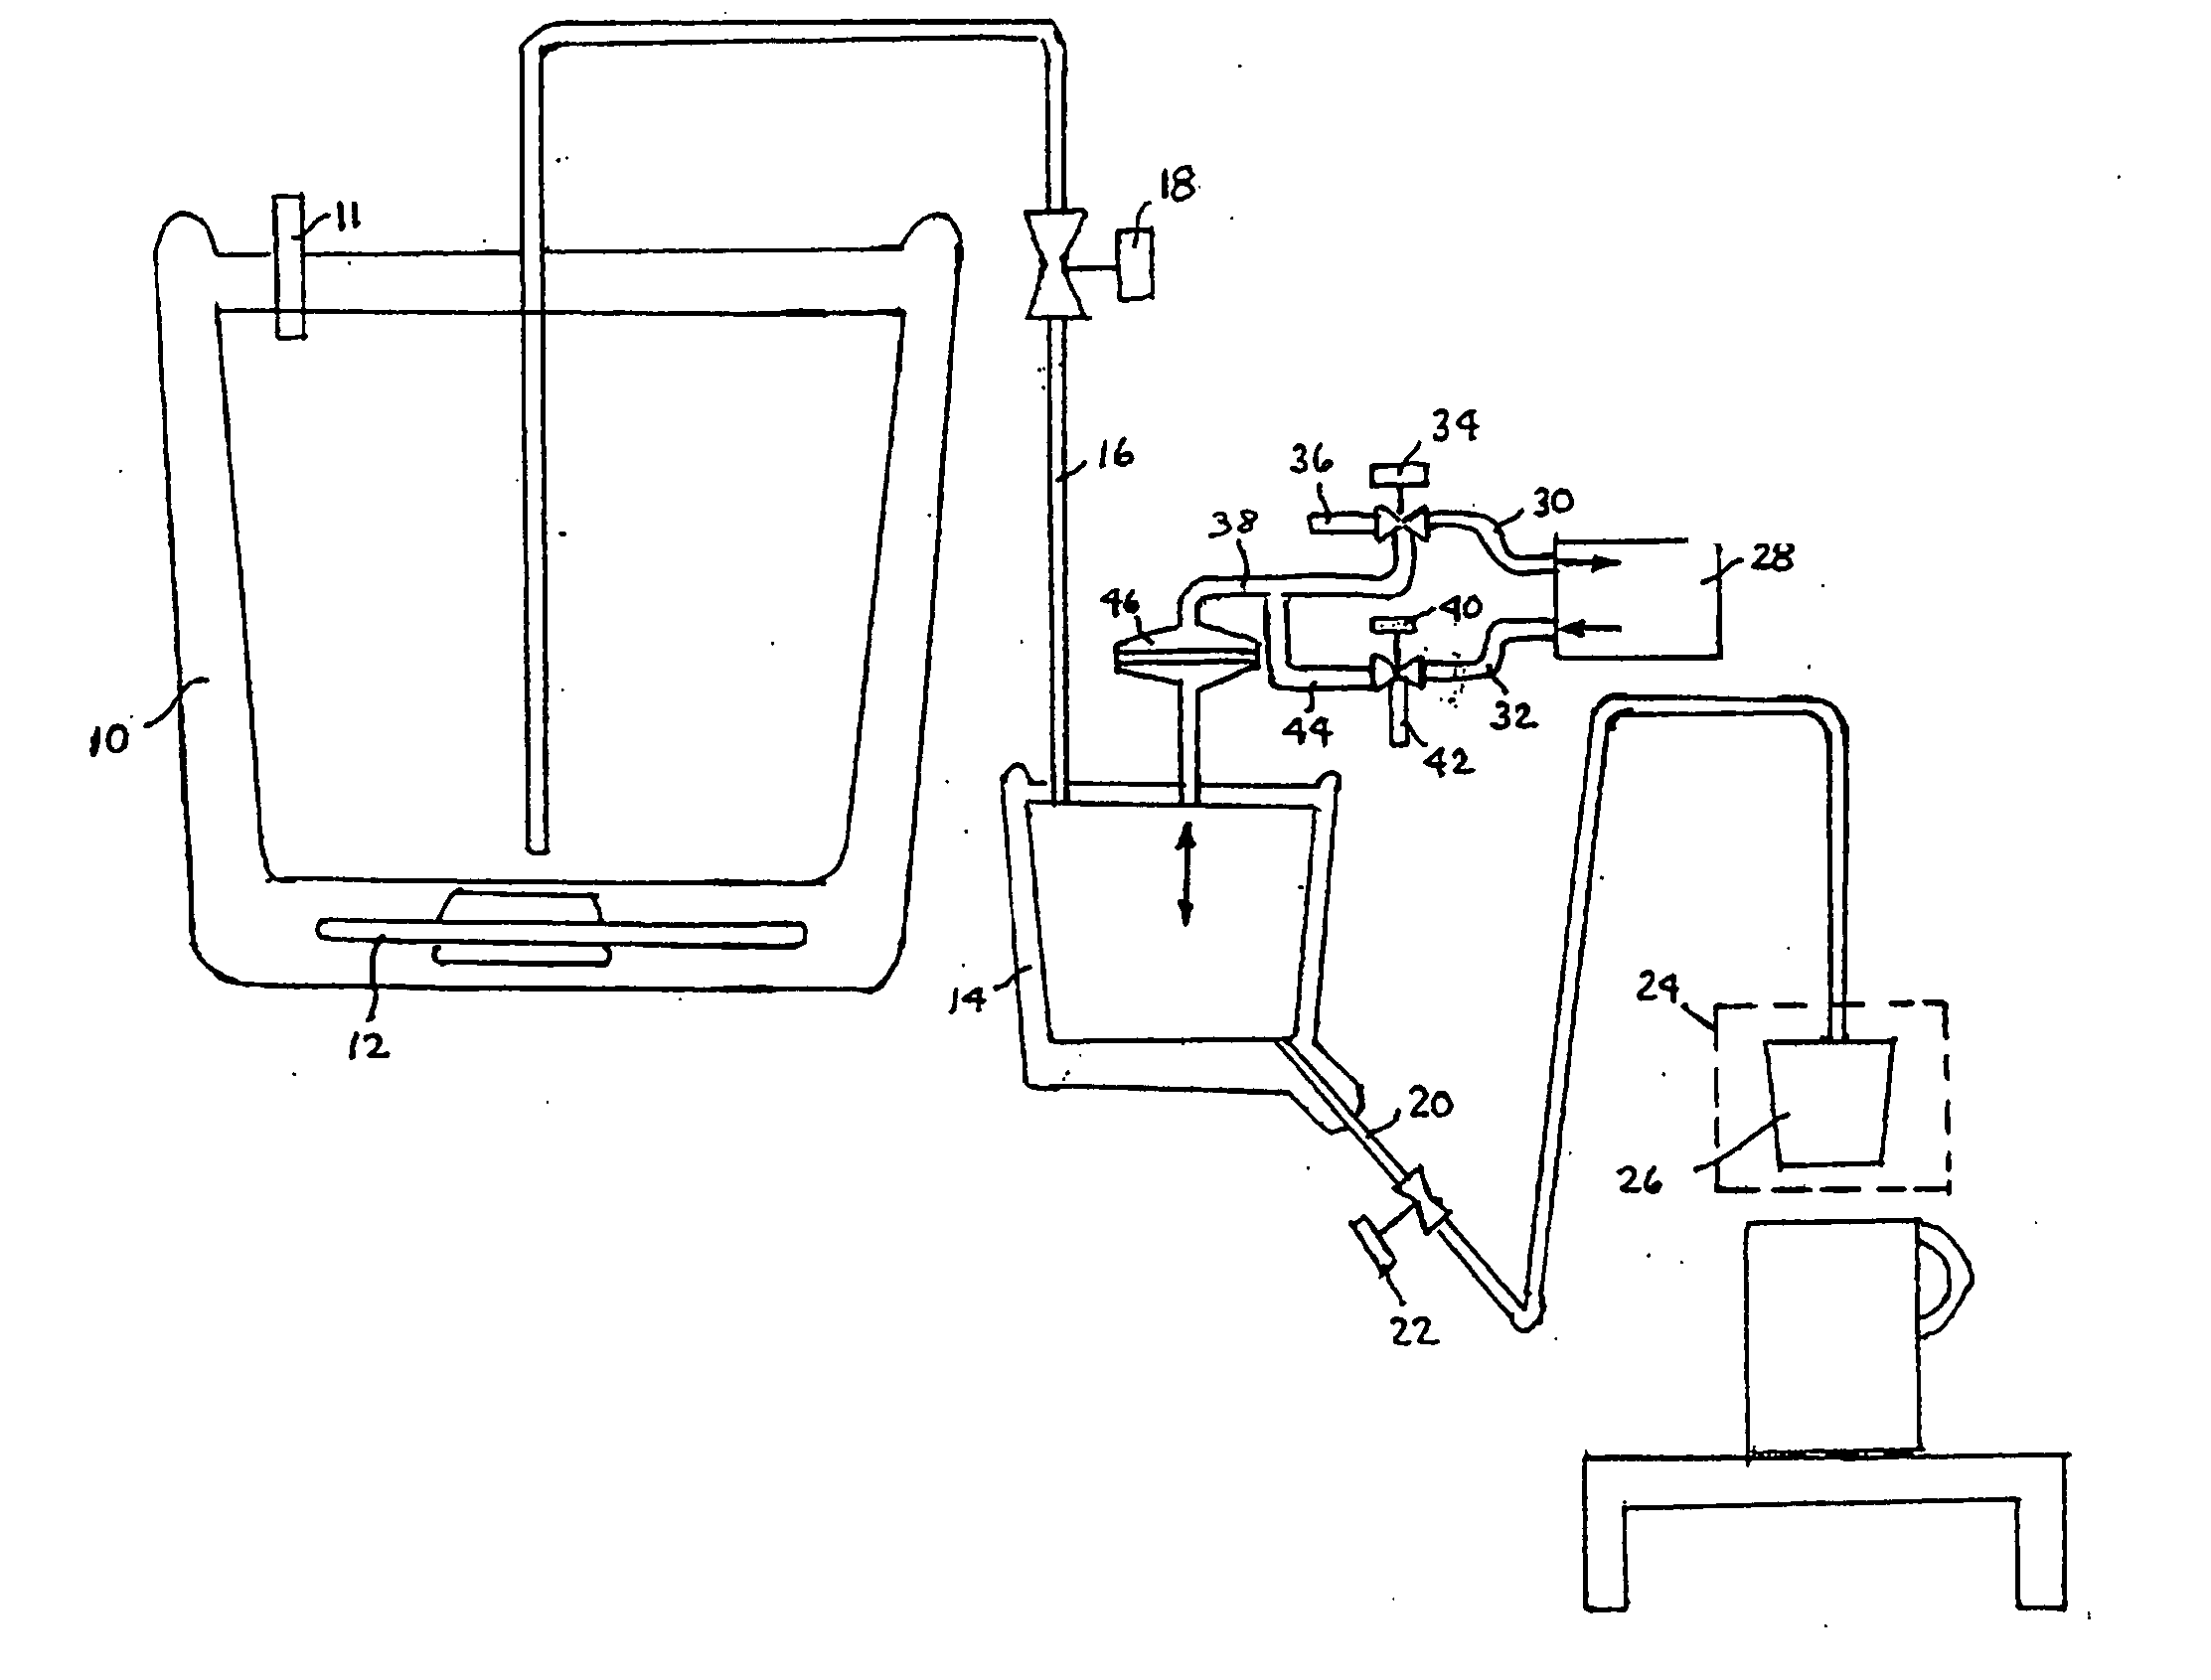 Dispensing system with vacuum-filled metering chamber